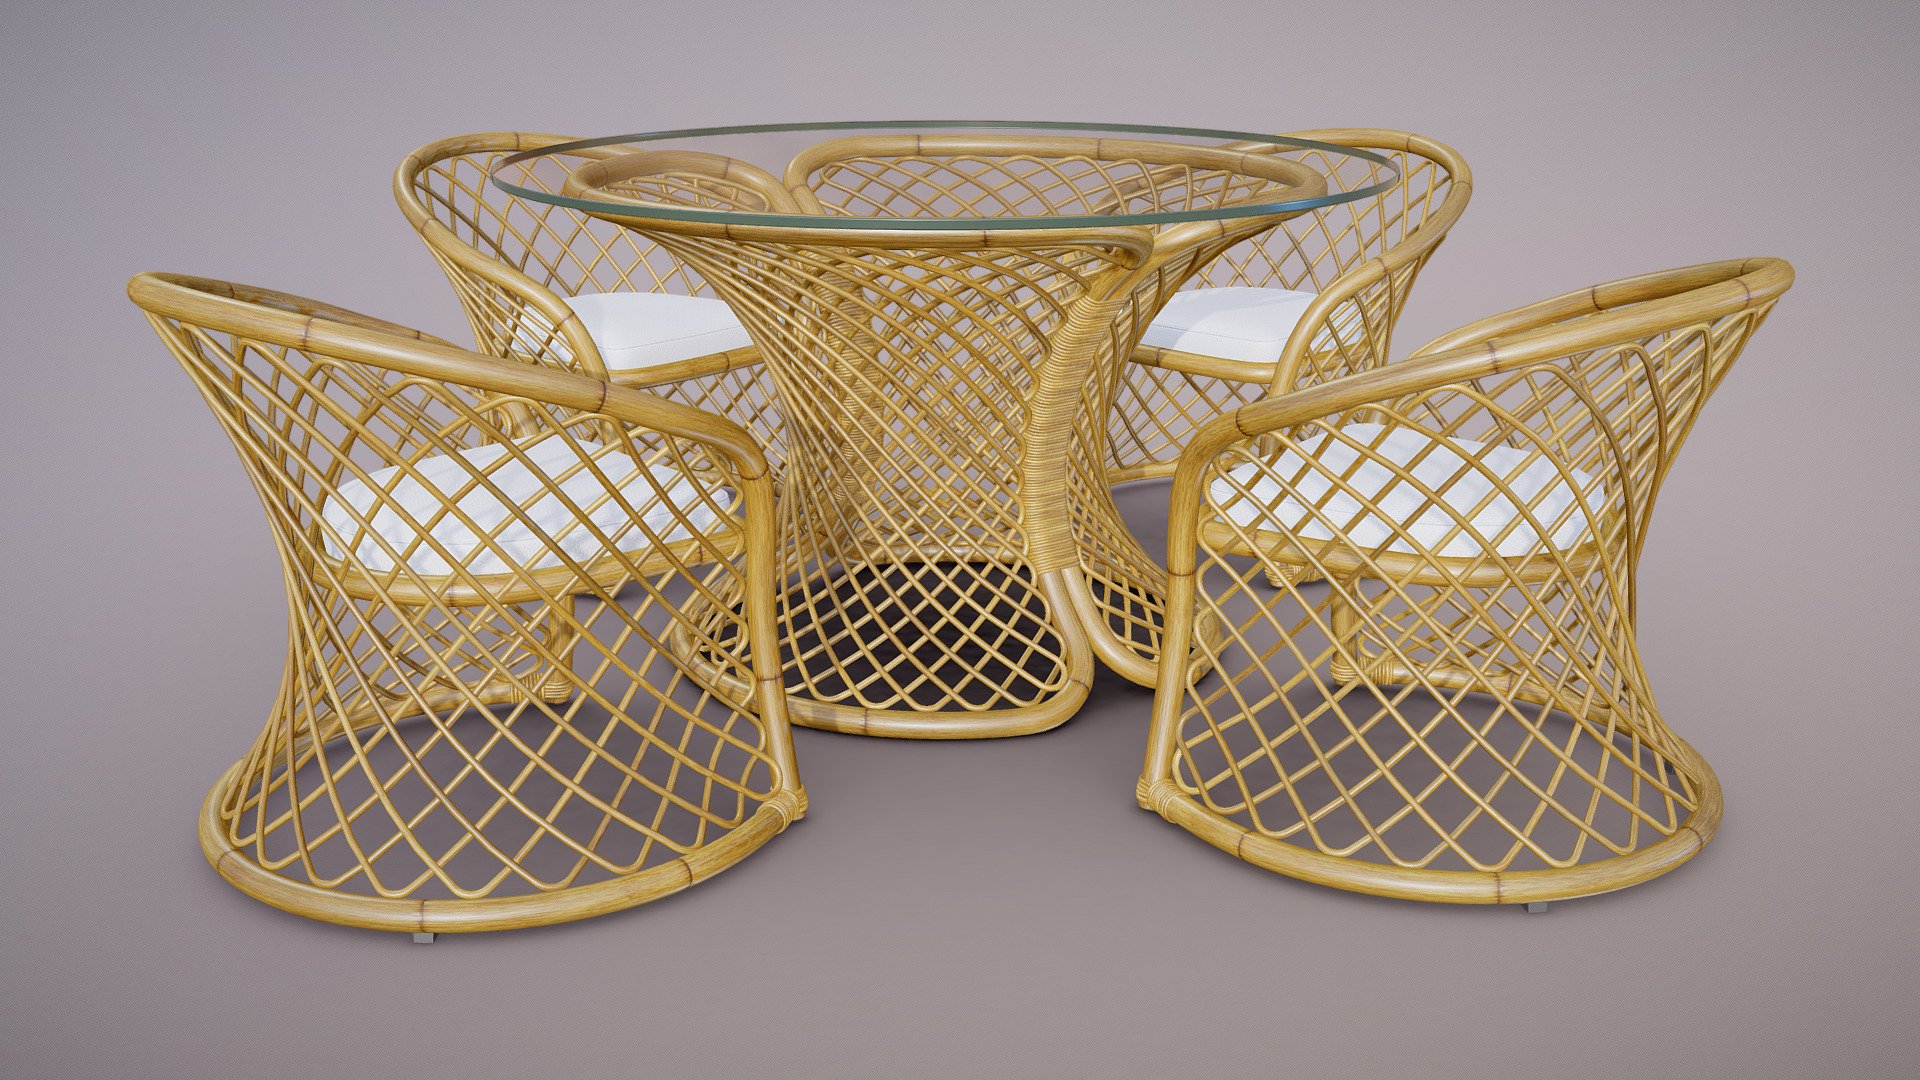 Rattan table and dinning chair furniture set.
Available in 3ds Max (Corona), FBX and OBJ formats.
Original model is not triangulated and can be subdivided if needed 3d model